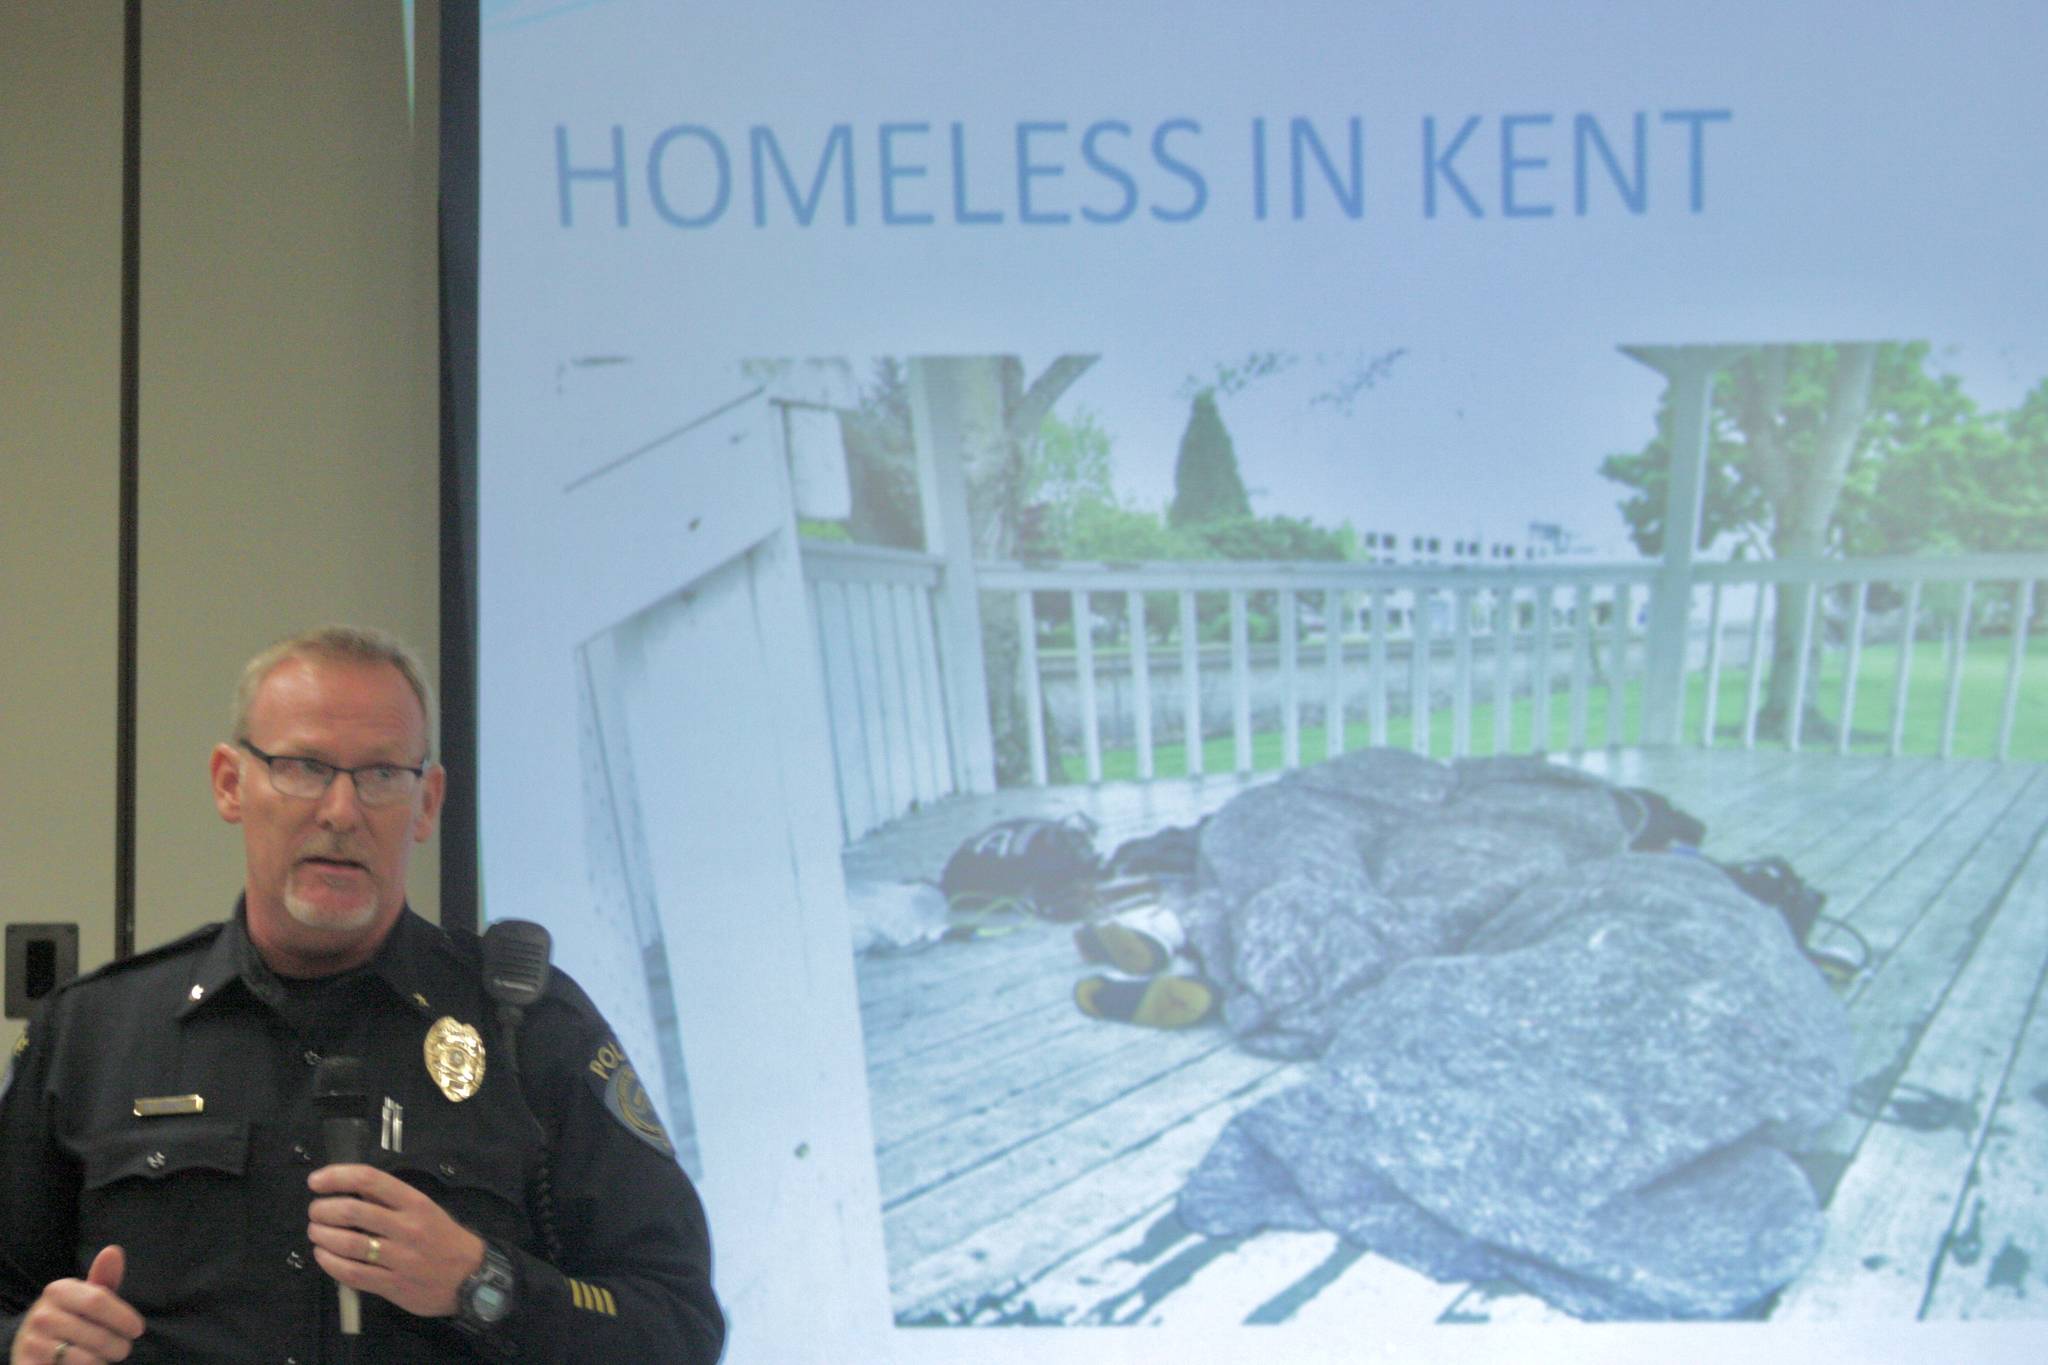 Kent Police Commander Mike O’Reilly, who oversees a special operation unit focused on the homeless, describe the department’s latest efforts in addressing the crisis during a public meeting Oct. 18 at Neely-O’Brien Elementary School. MARK KLAAS, Kent Reporter